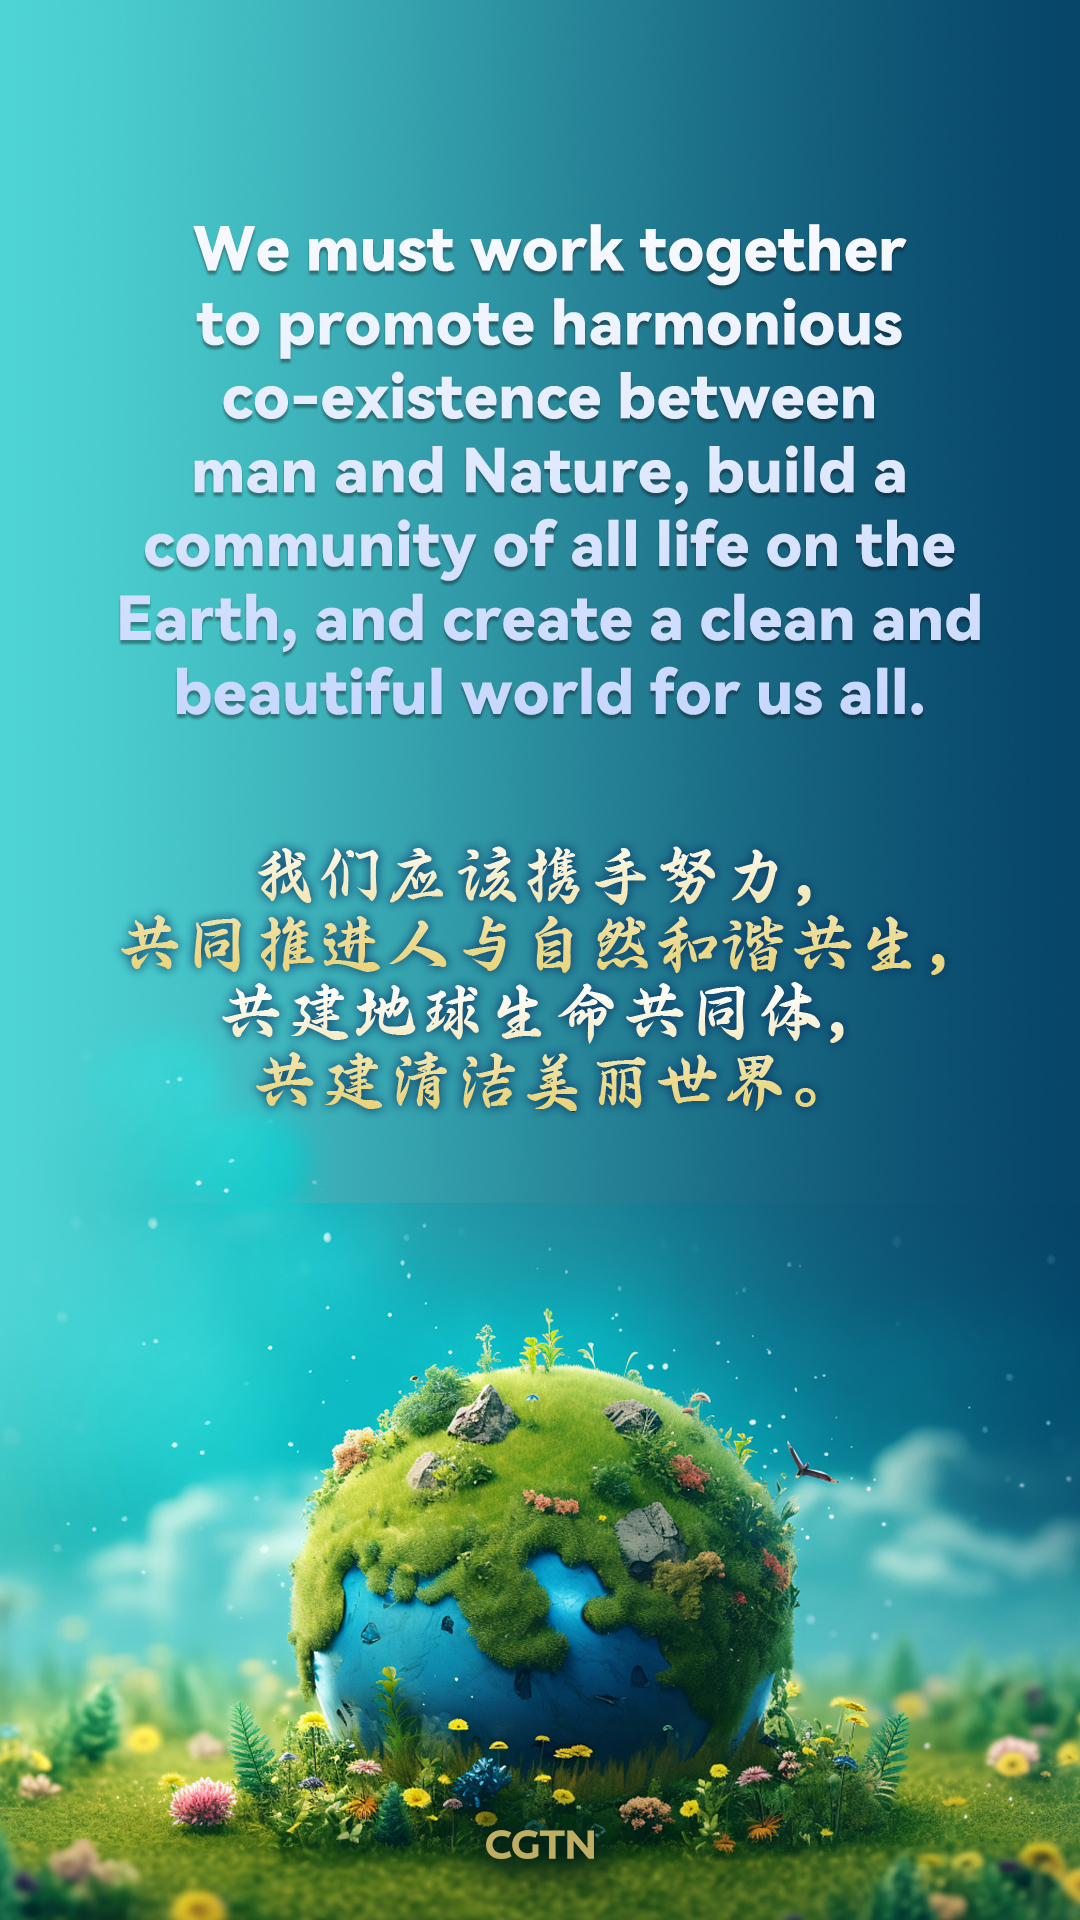 Key quotes of Xi Jinping on protecting the Earth